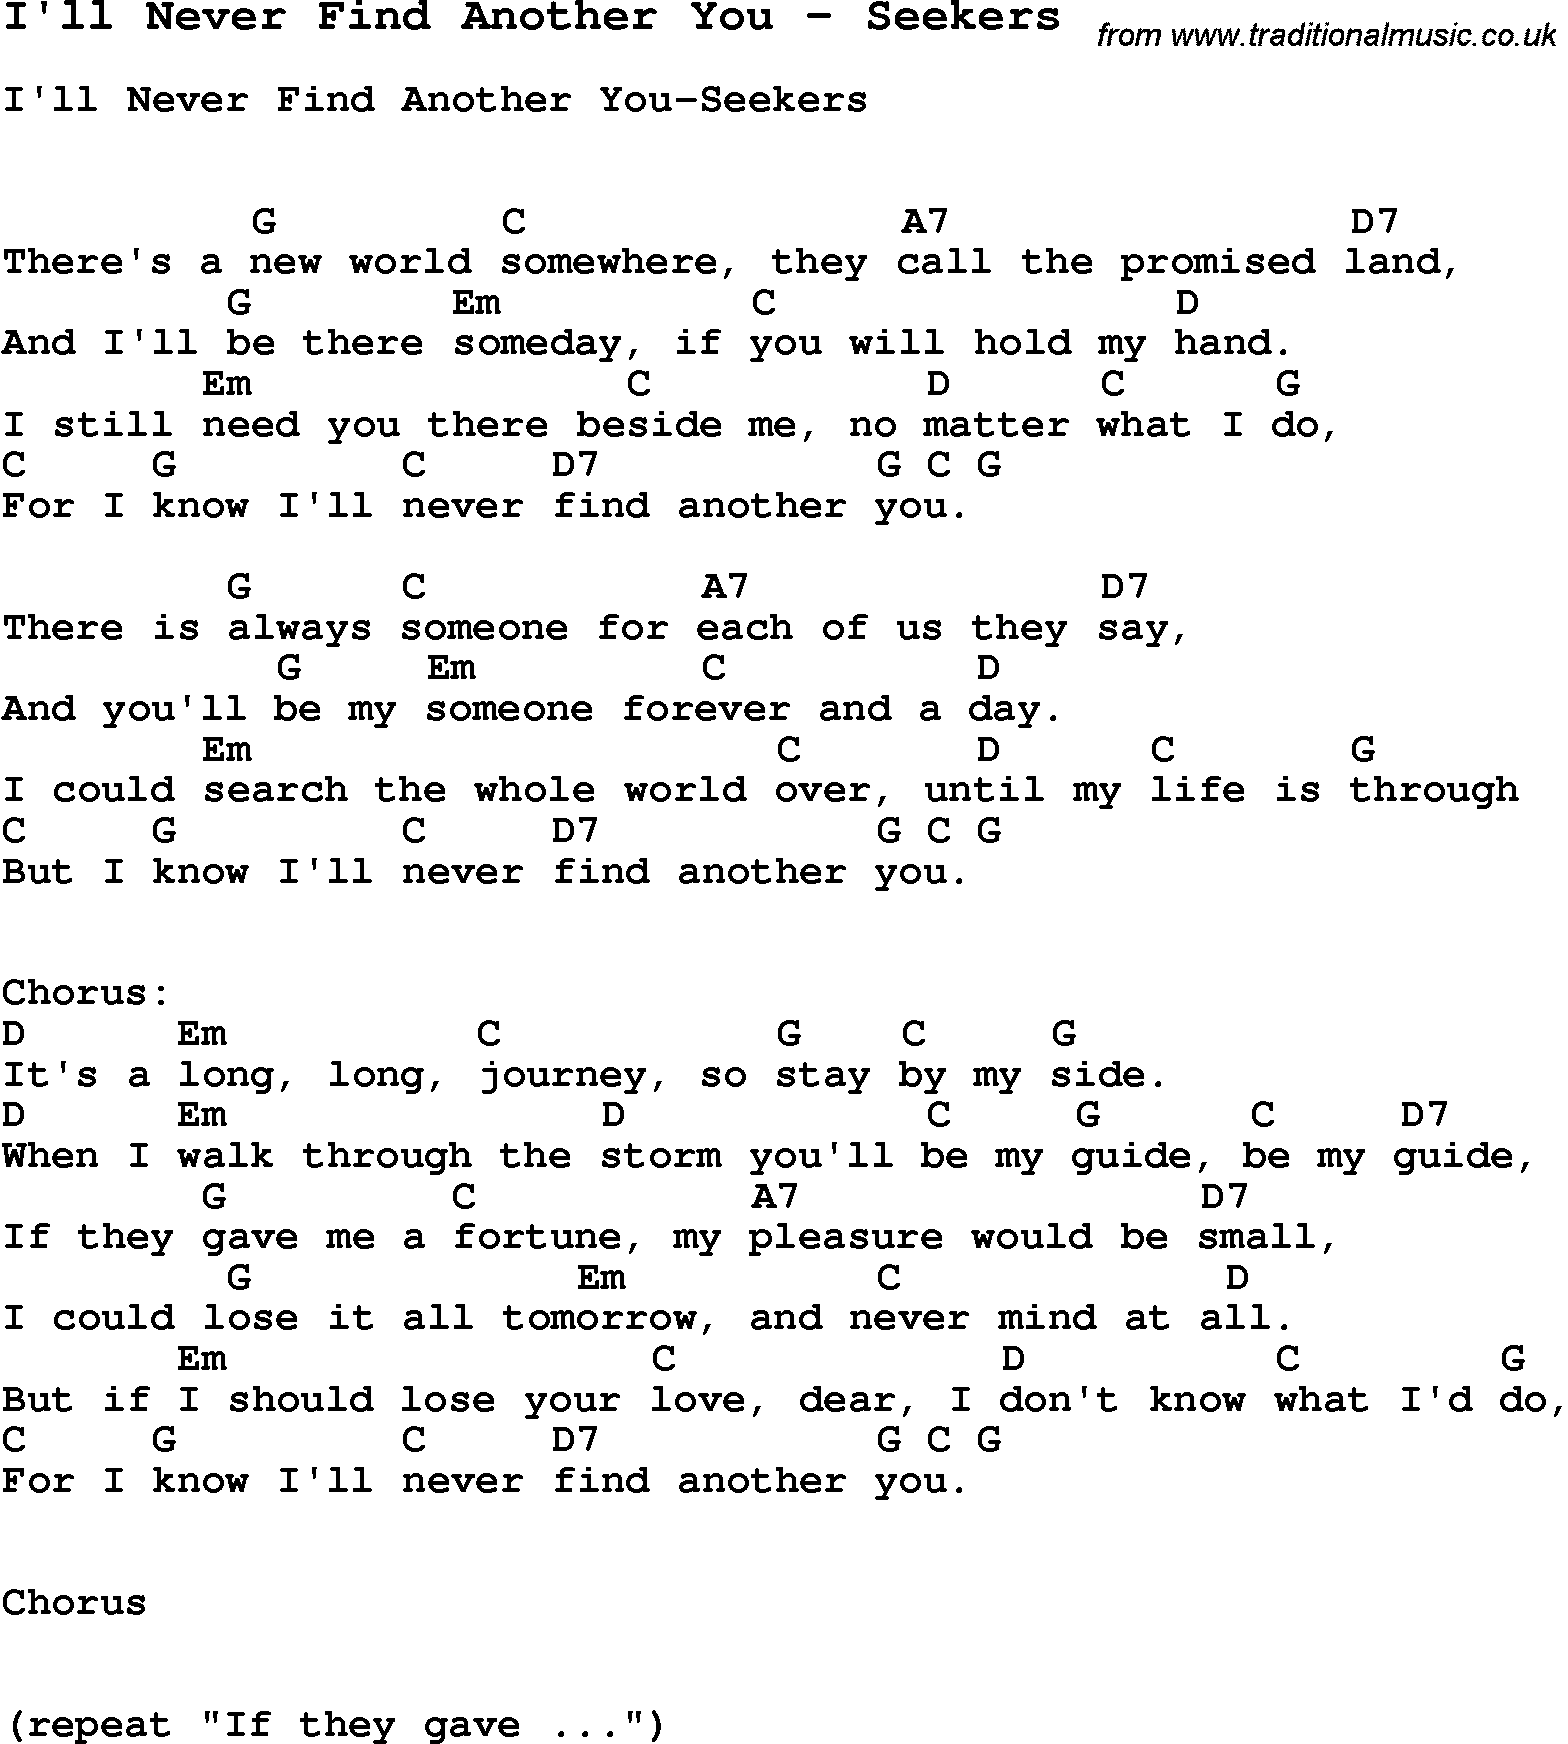 Song I'll Never Find Another You by Seekers, with lyrics for vocal performance and accompaniment chords for Ukulele, Guitar Banjo etc.